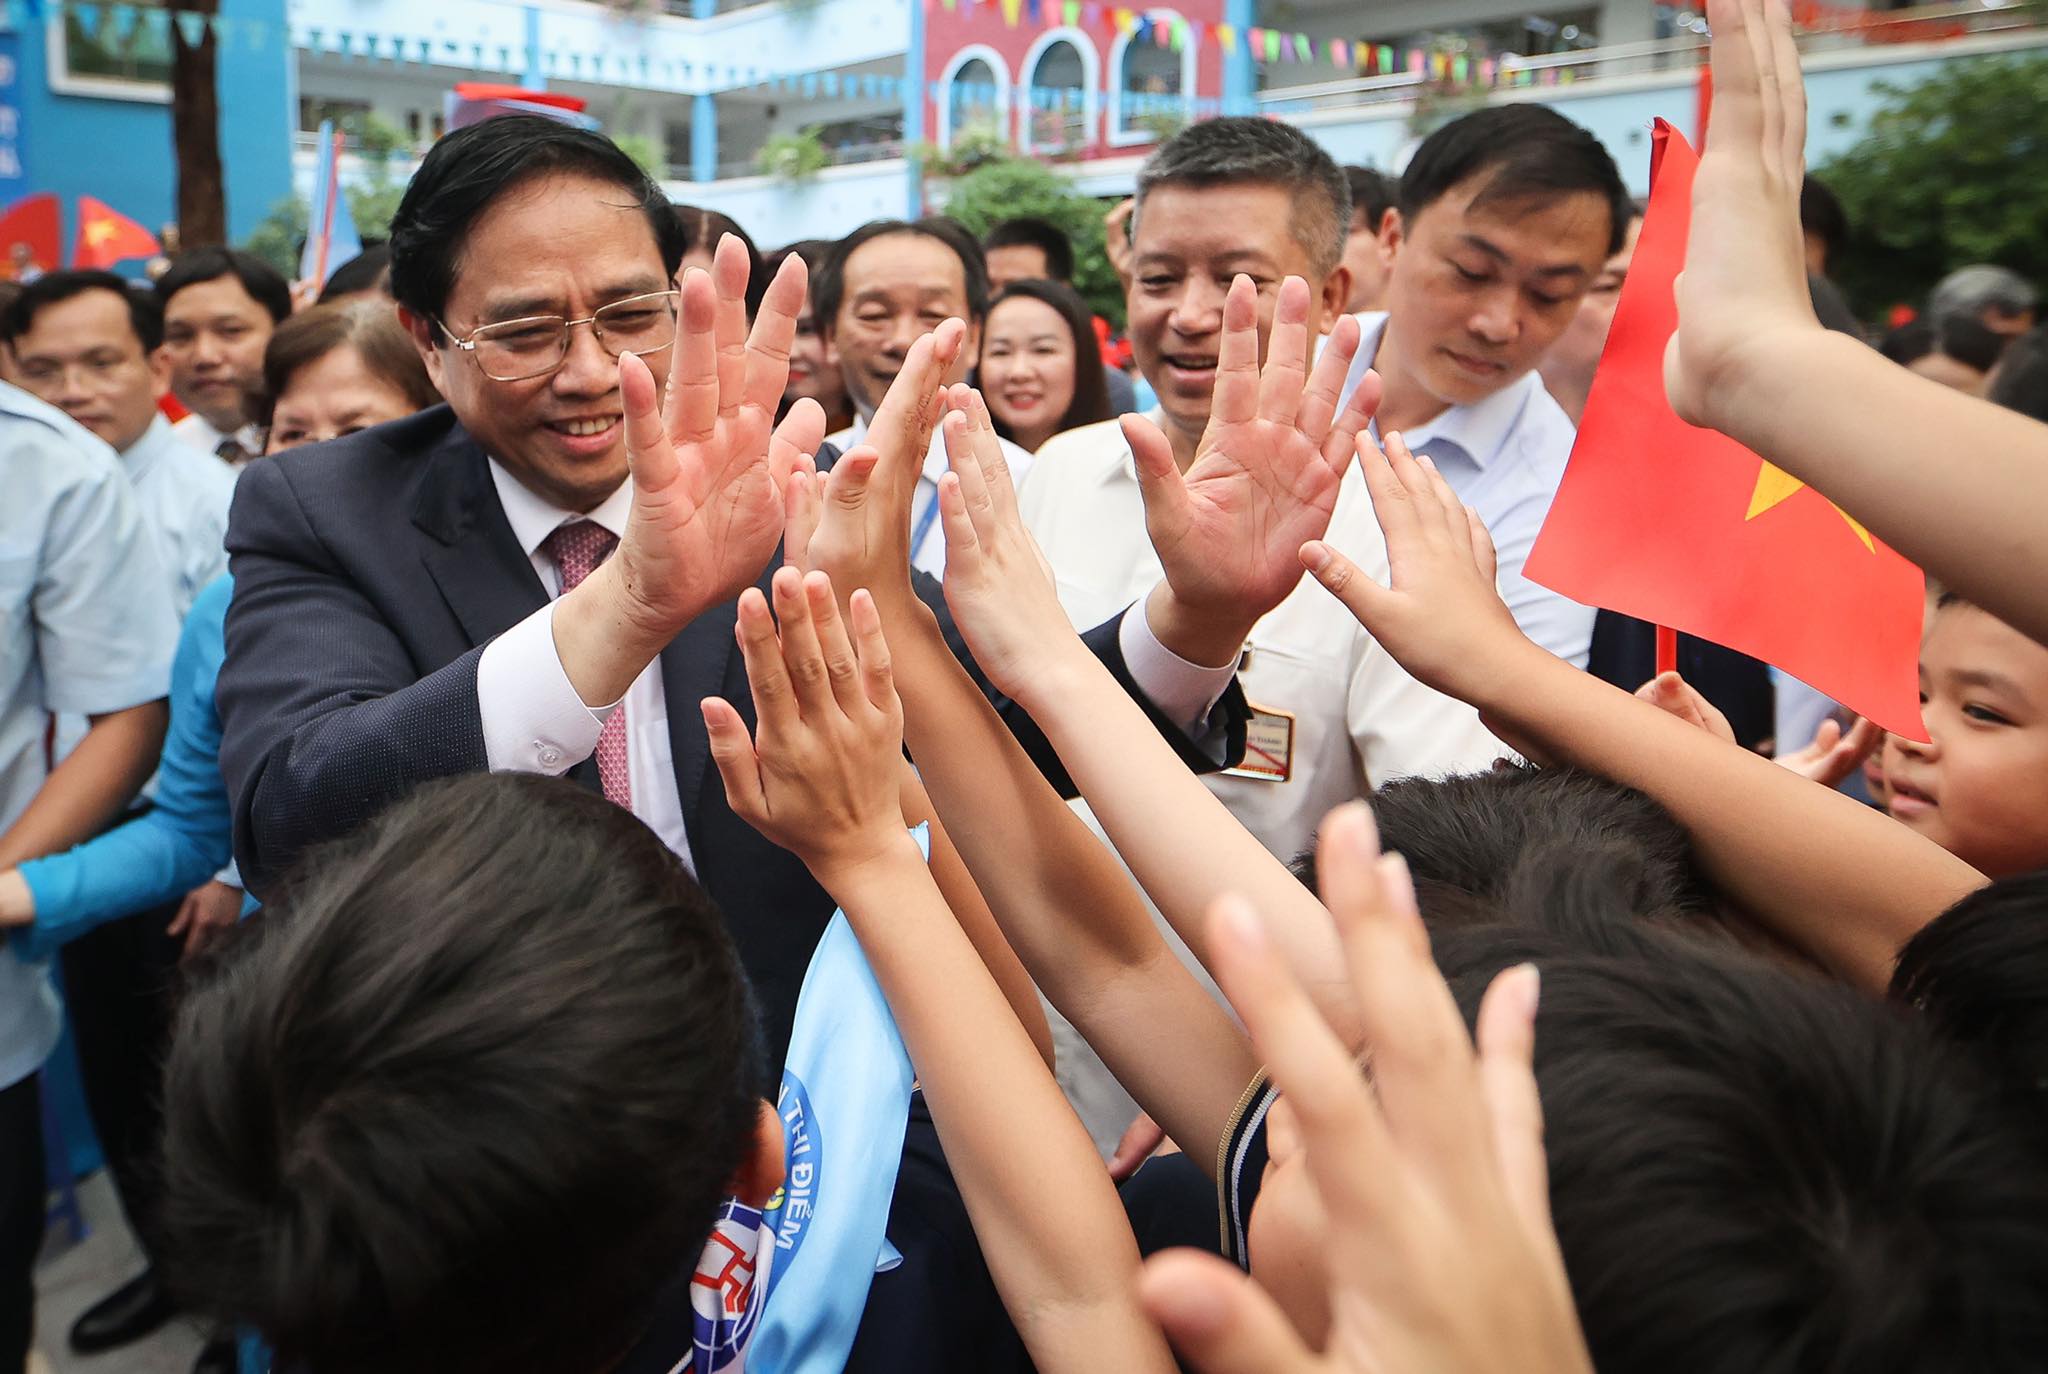 Prime Minister Pham Minh Chinh high-fives students before the school opening ceremony at Doan Thi Diem Elementary School in Hanoi, September 5, 2022. Photo: Nguyen Khanh / Tuoi Tre